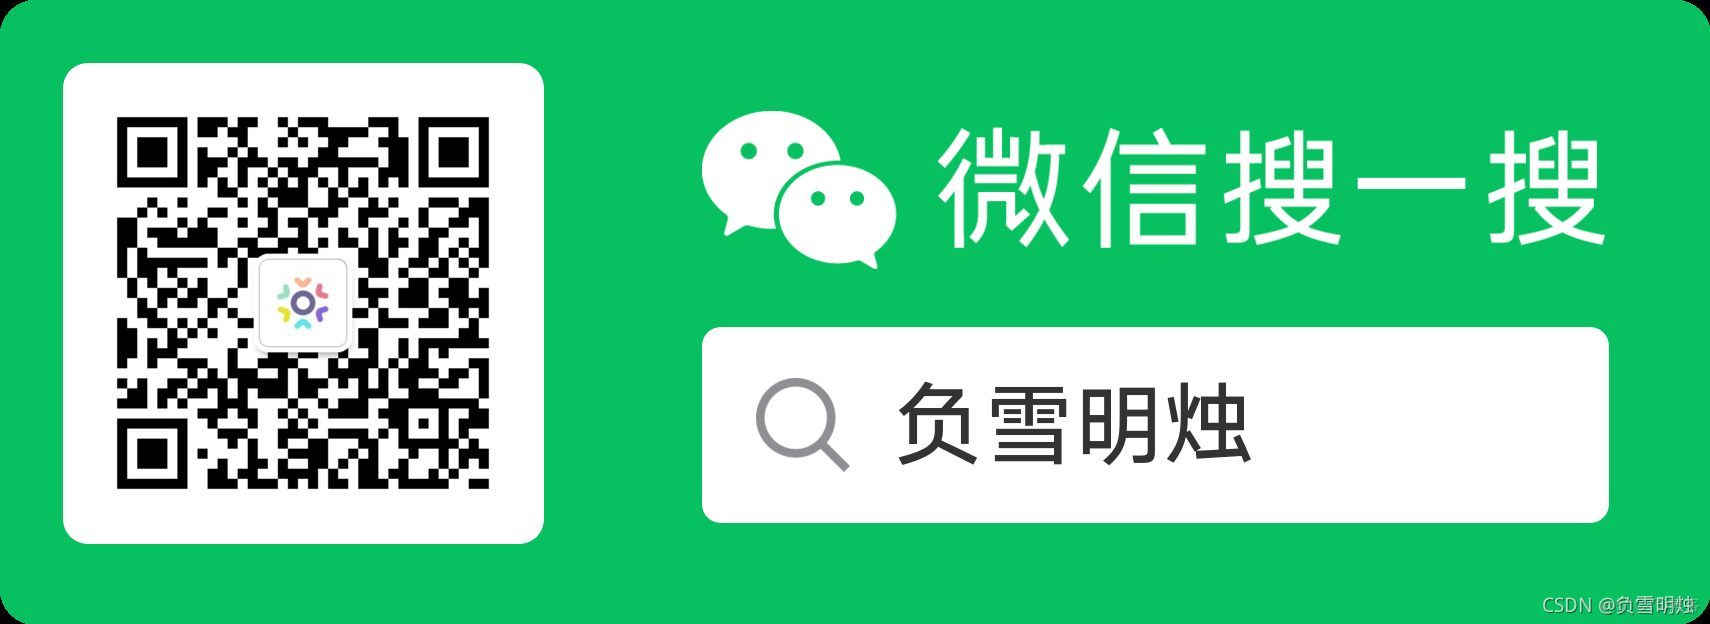 Android 控件使用教程（三）—— NineGridImageView 九宫格展示图片_gridview